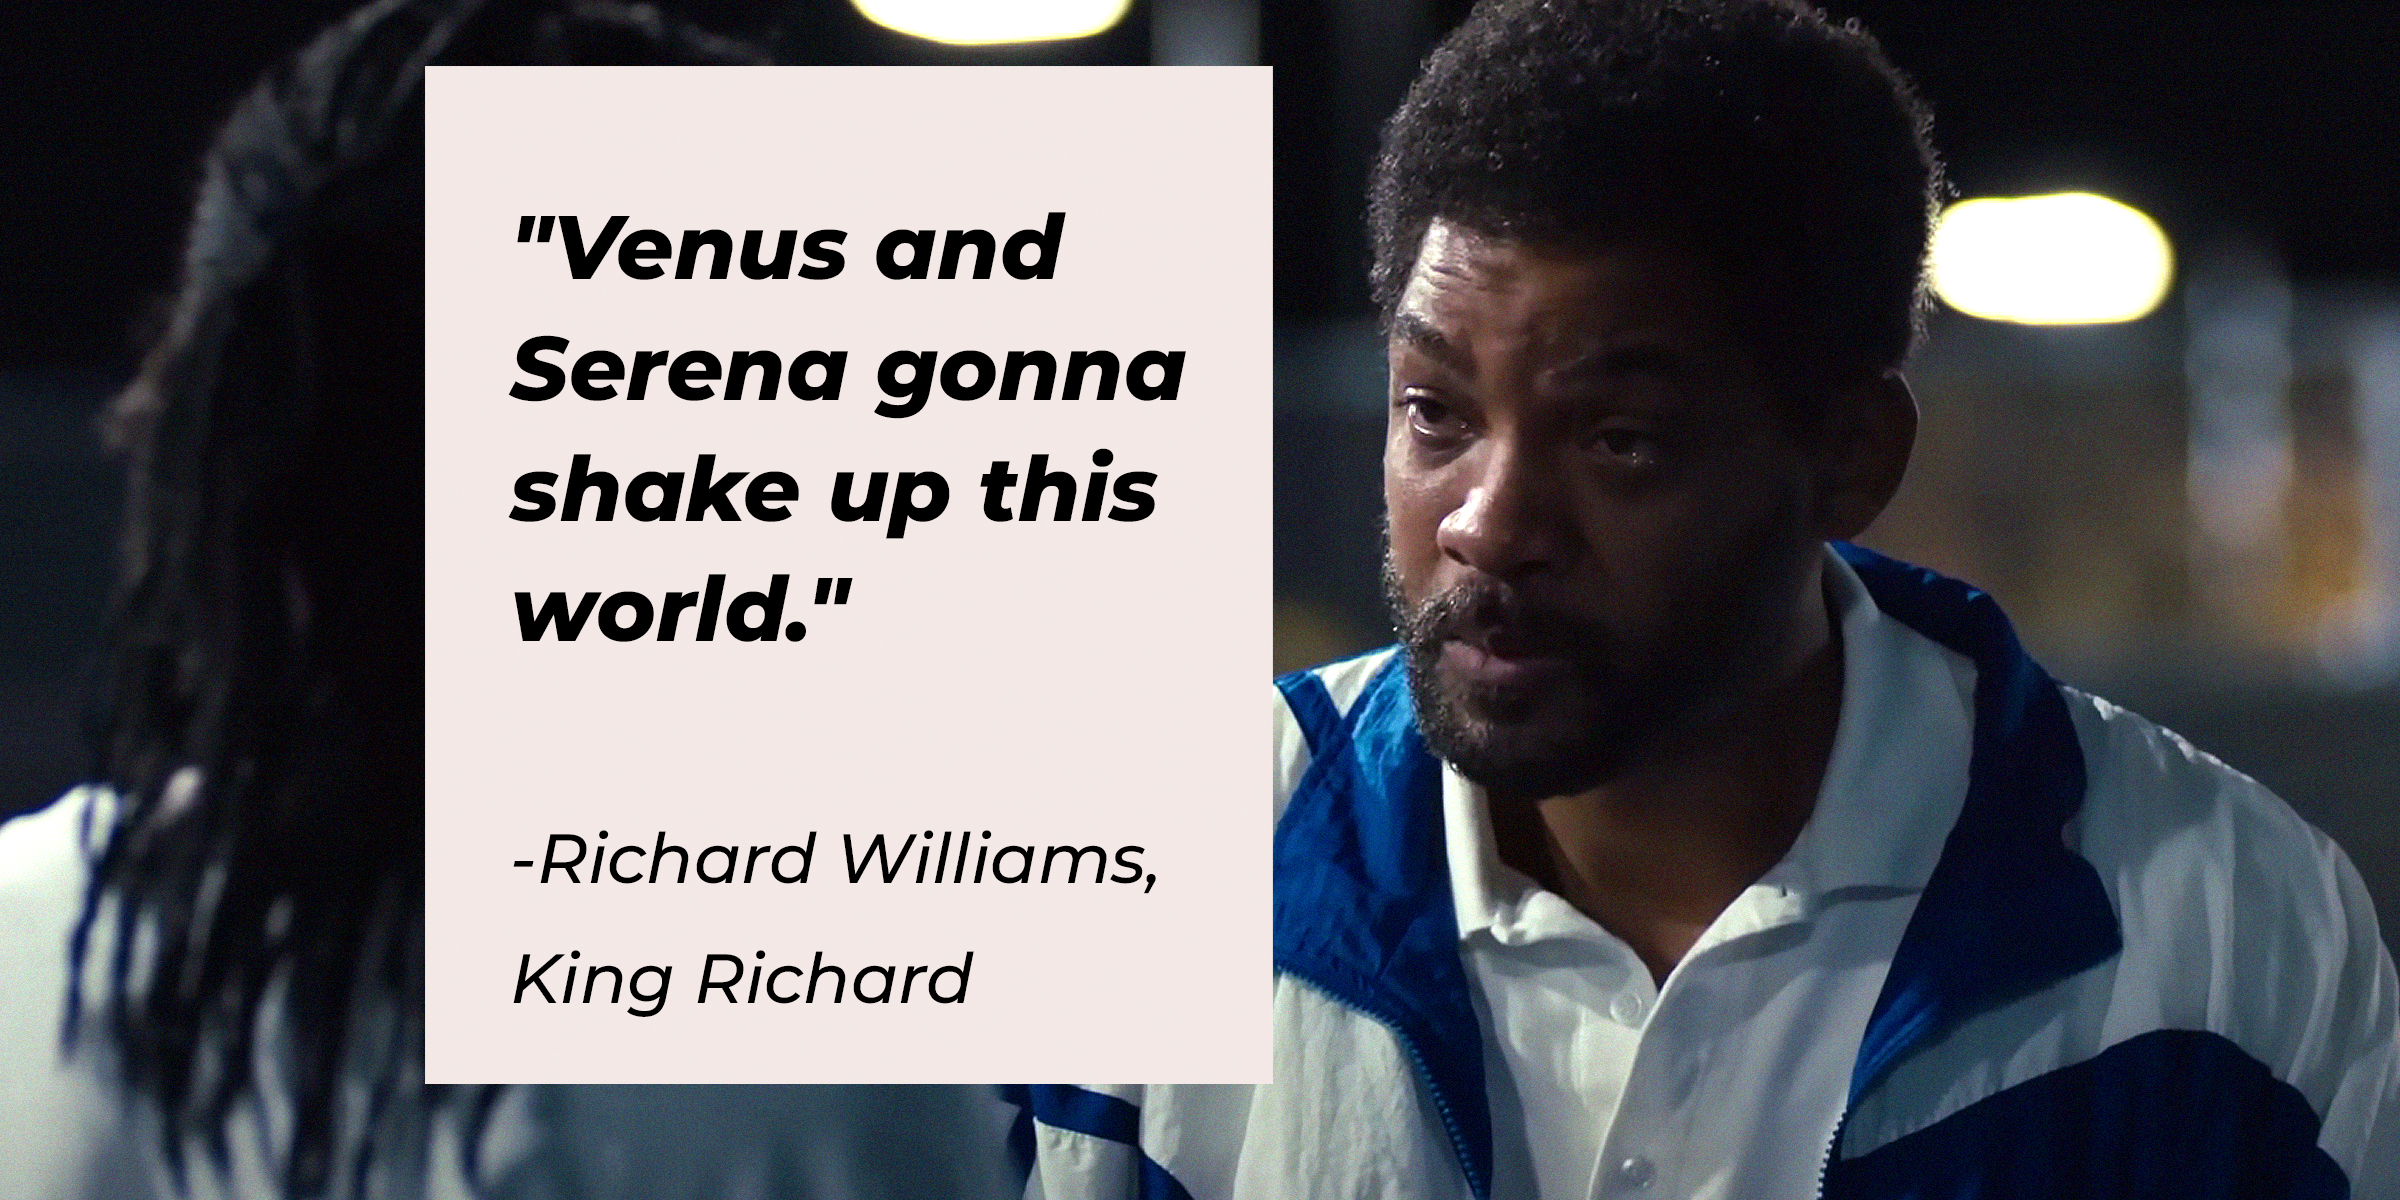 Will Smith as Richard Williams in "King Richard." | Source: youtube.com/WarnerBrosPictures